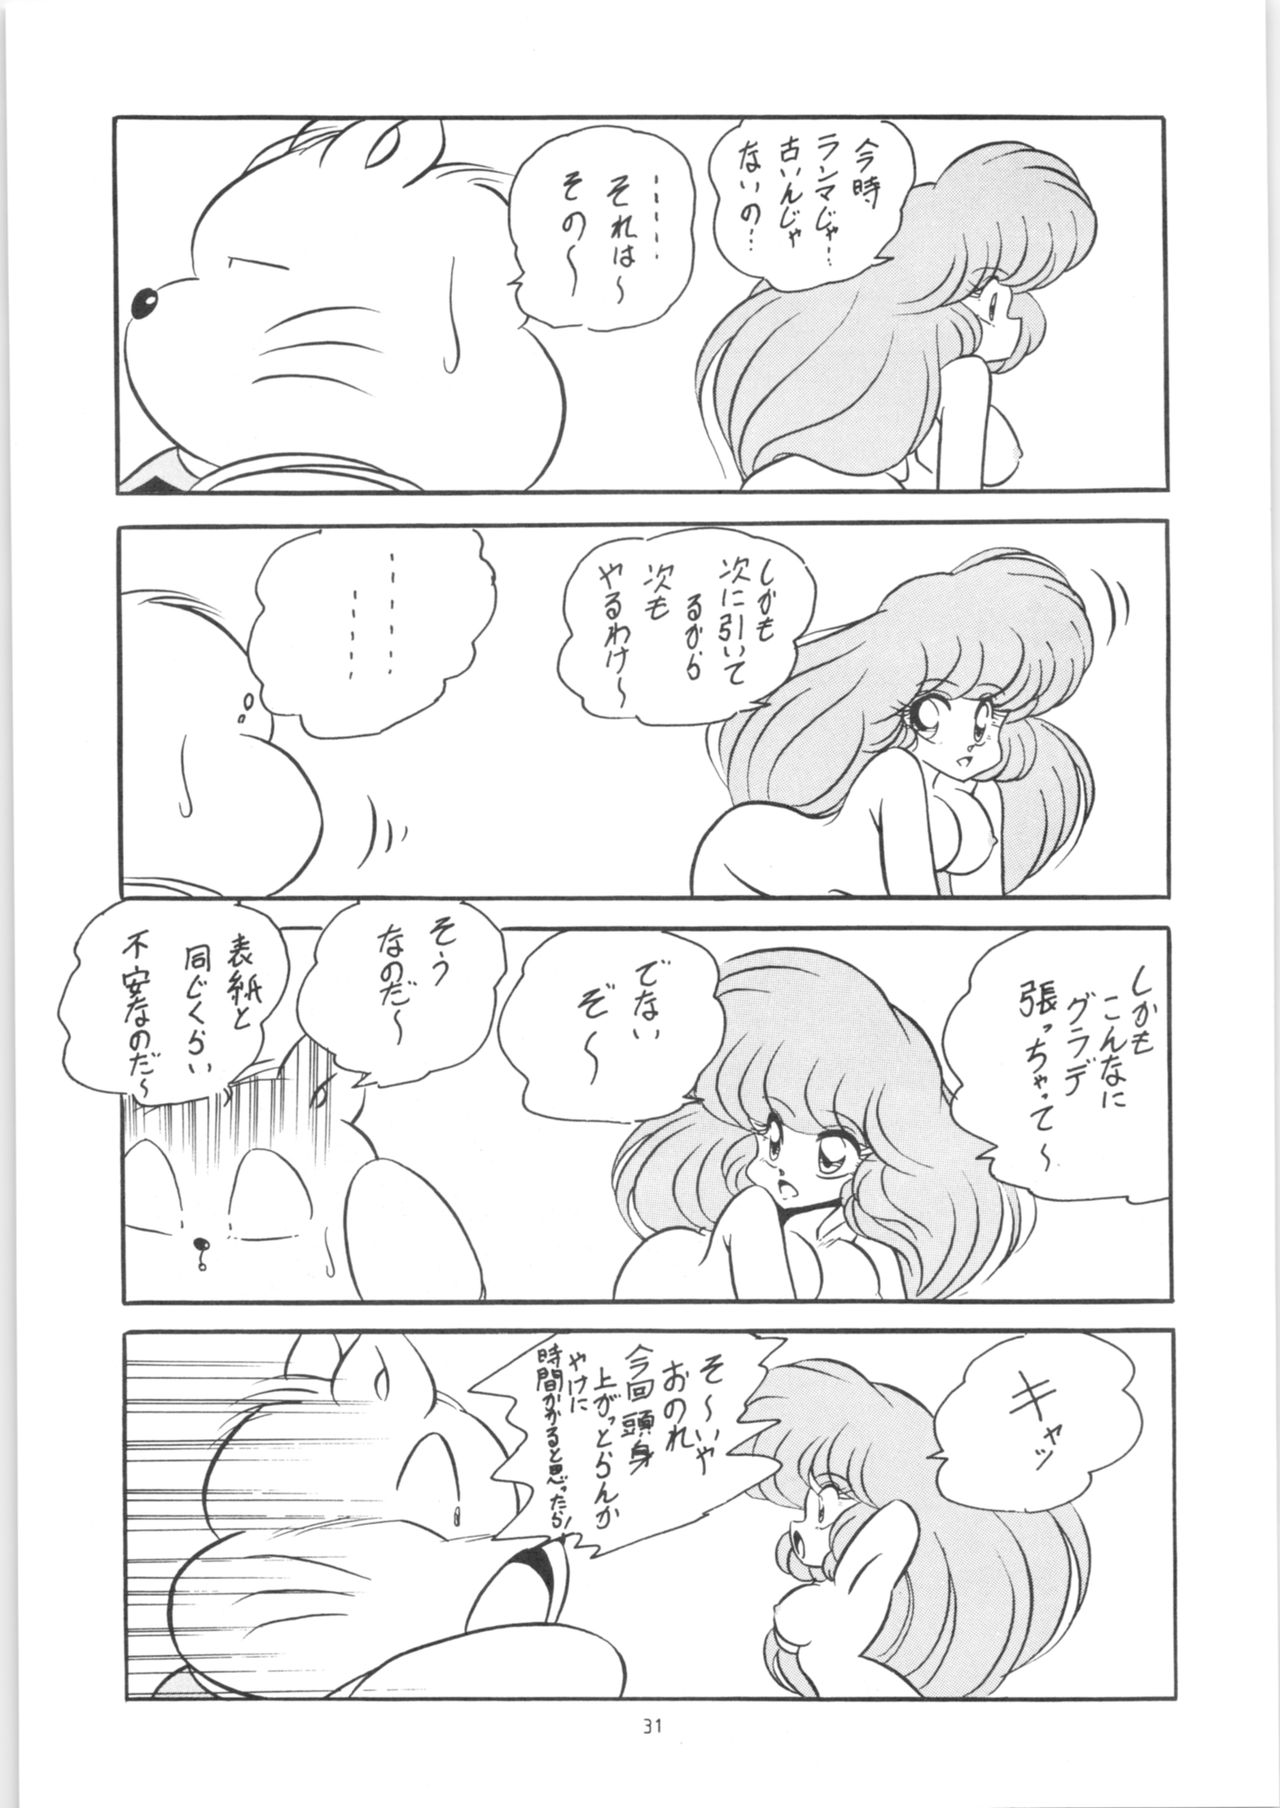 [C-COMPANY] C-COMPANY SPECIAL STAGE 13 (Ranma 1/2) page 32 full